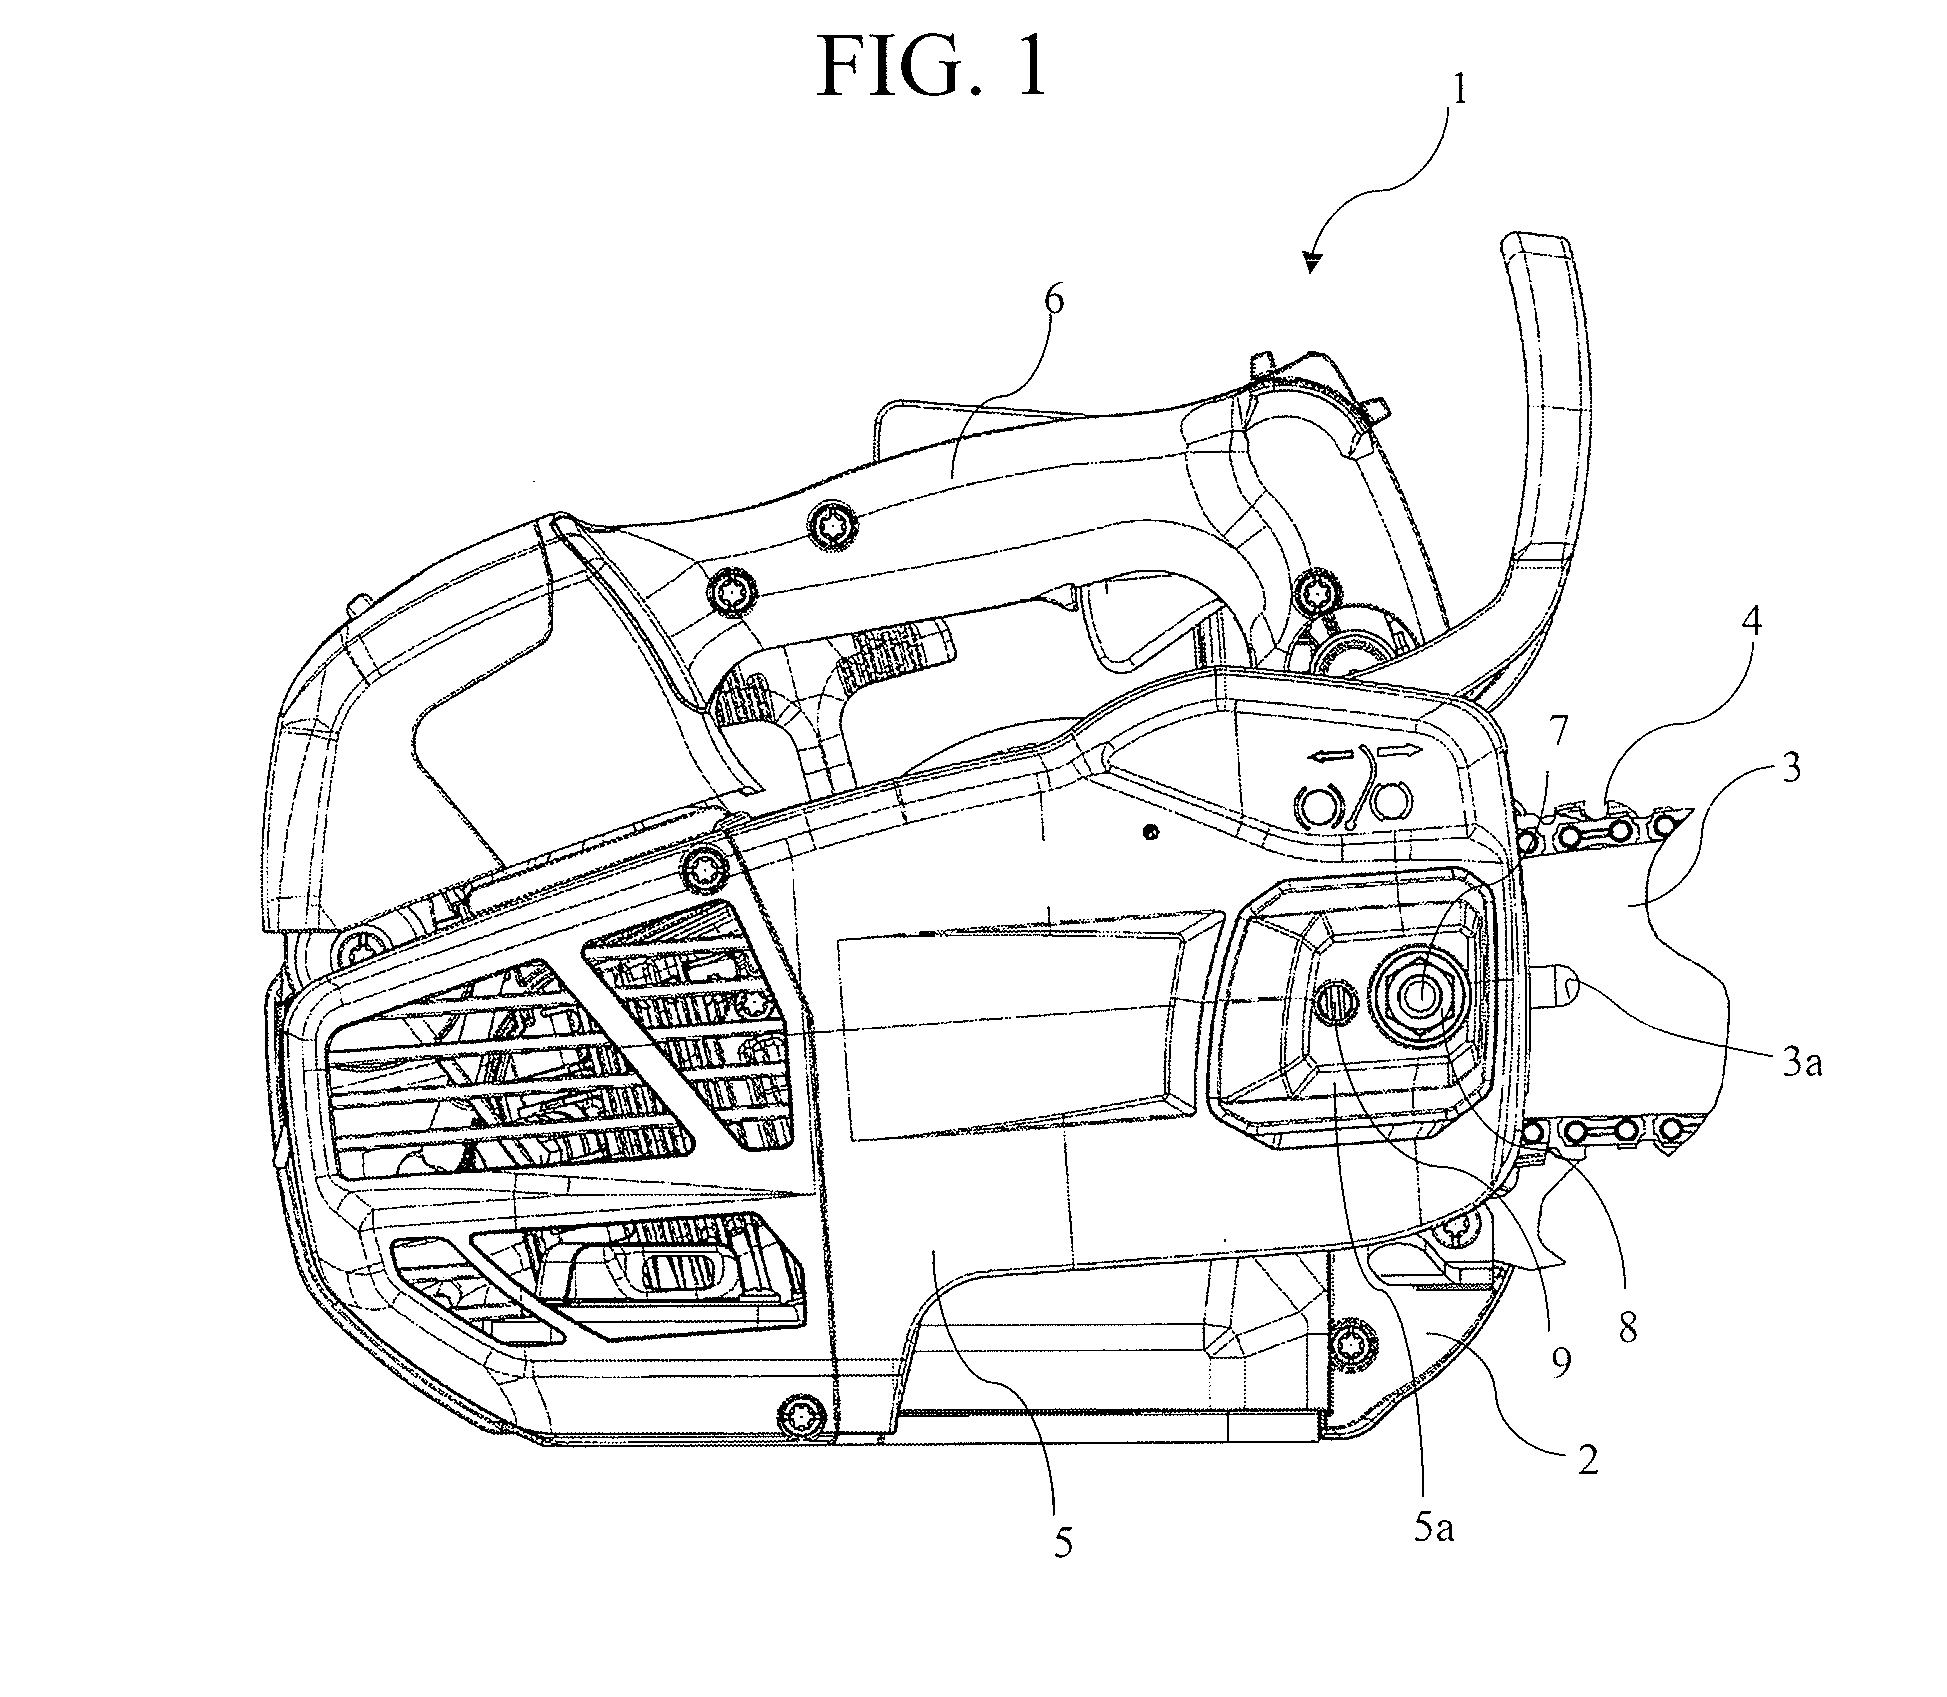 Chain tension adjustment device of chain saw